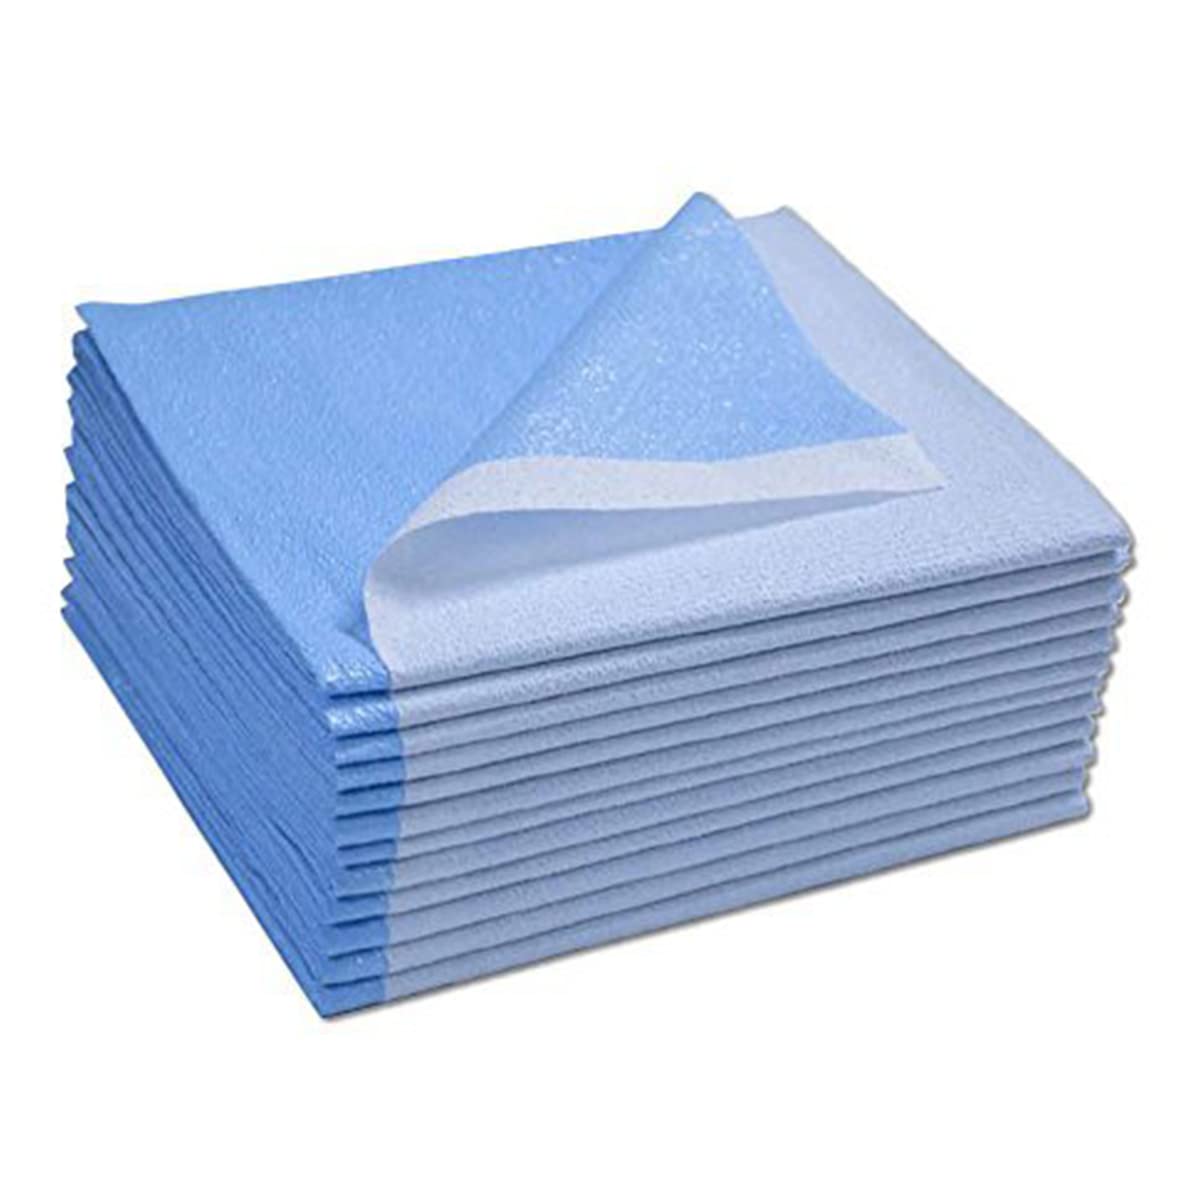 Avalon Papers Single-Use Medical Equipment Drape, Blue, 40" x 90" (Pack of 50) - Stretcher Sheet or Treatment Table Coverr - Fluid and Barr...